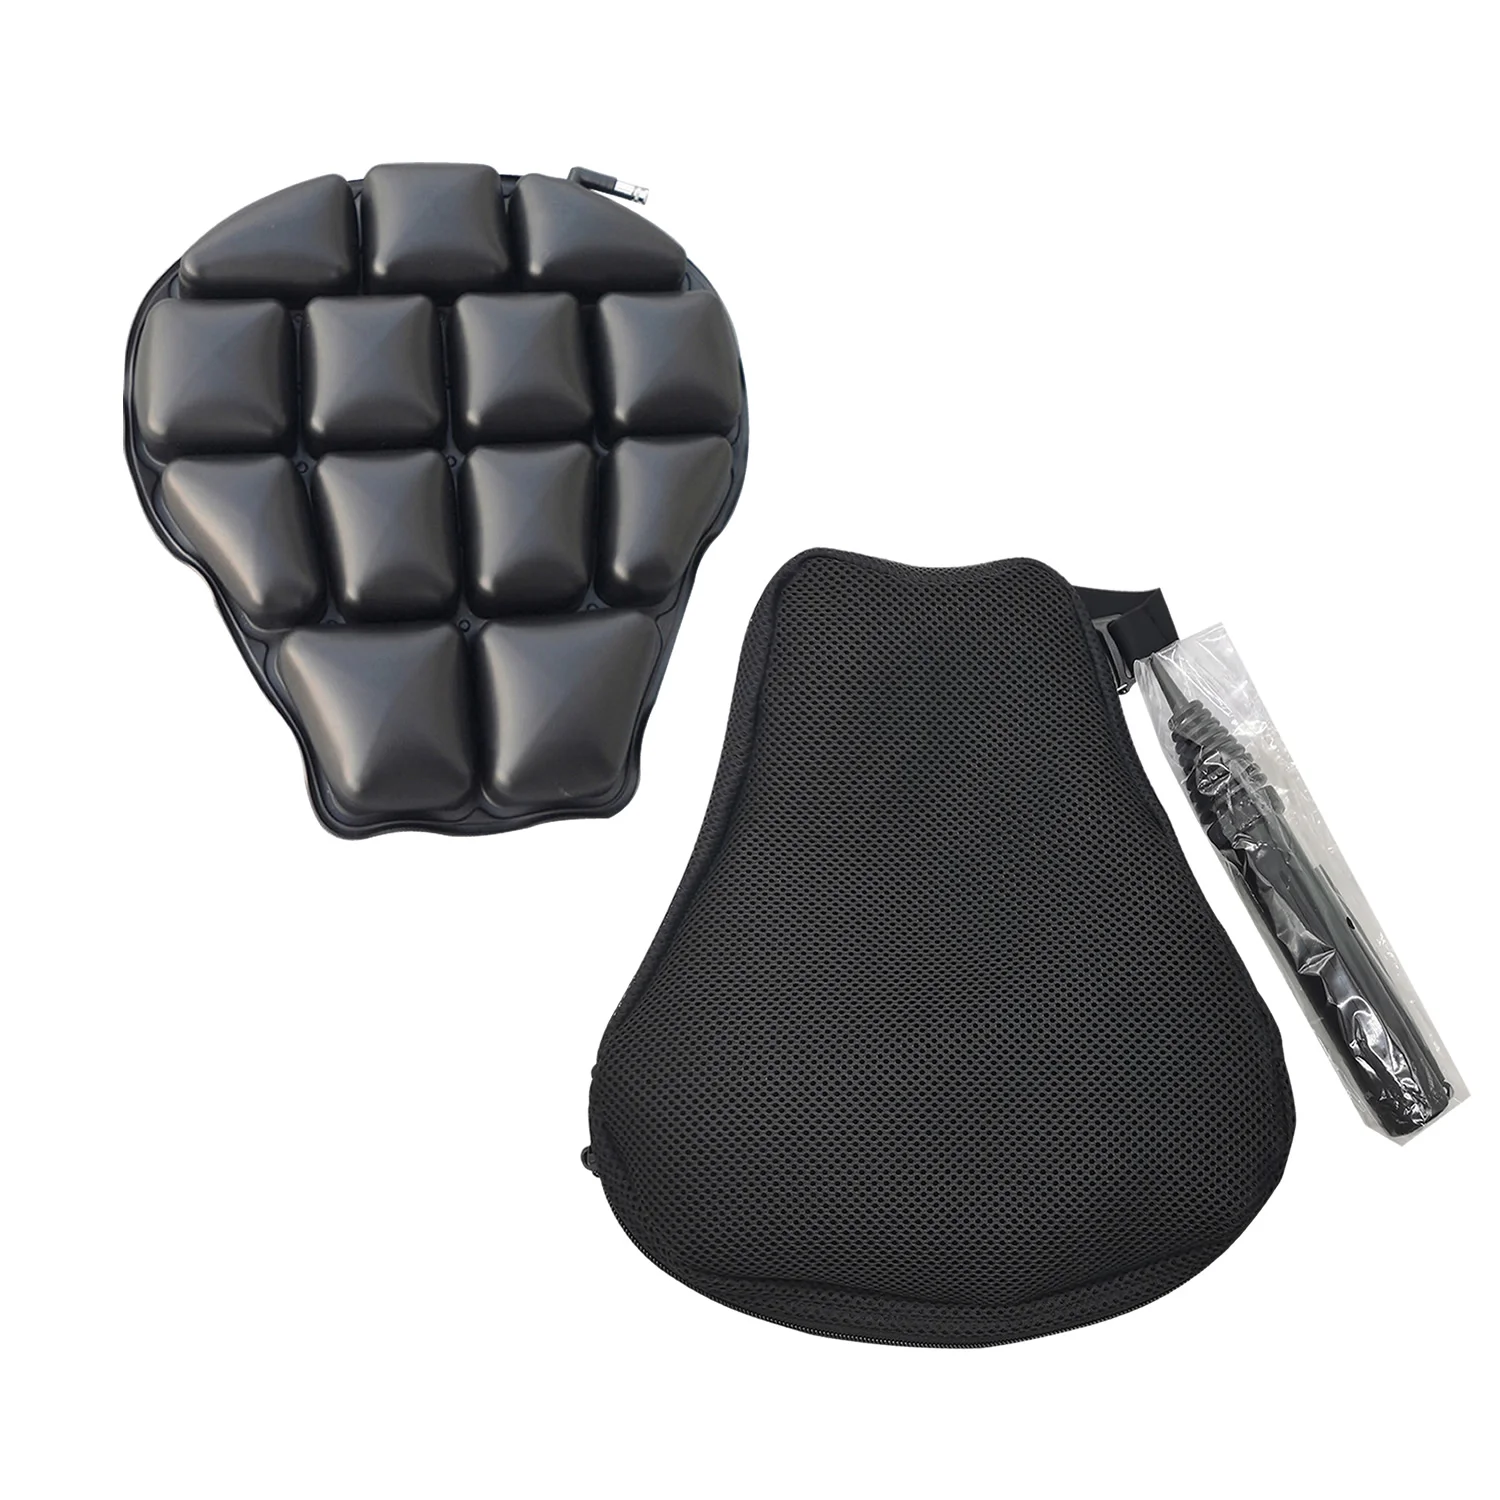 Airhawk Motorcycle Seat Cushion for Small Cruiser R Motorcycles - Team  Motorcycle